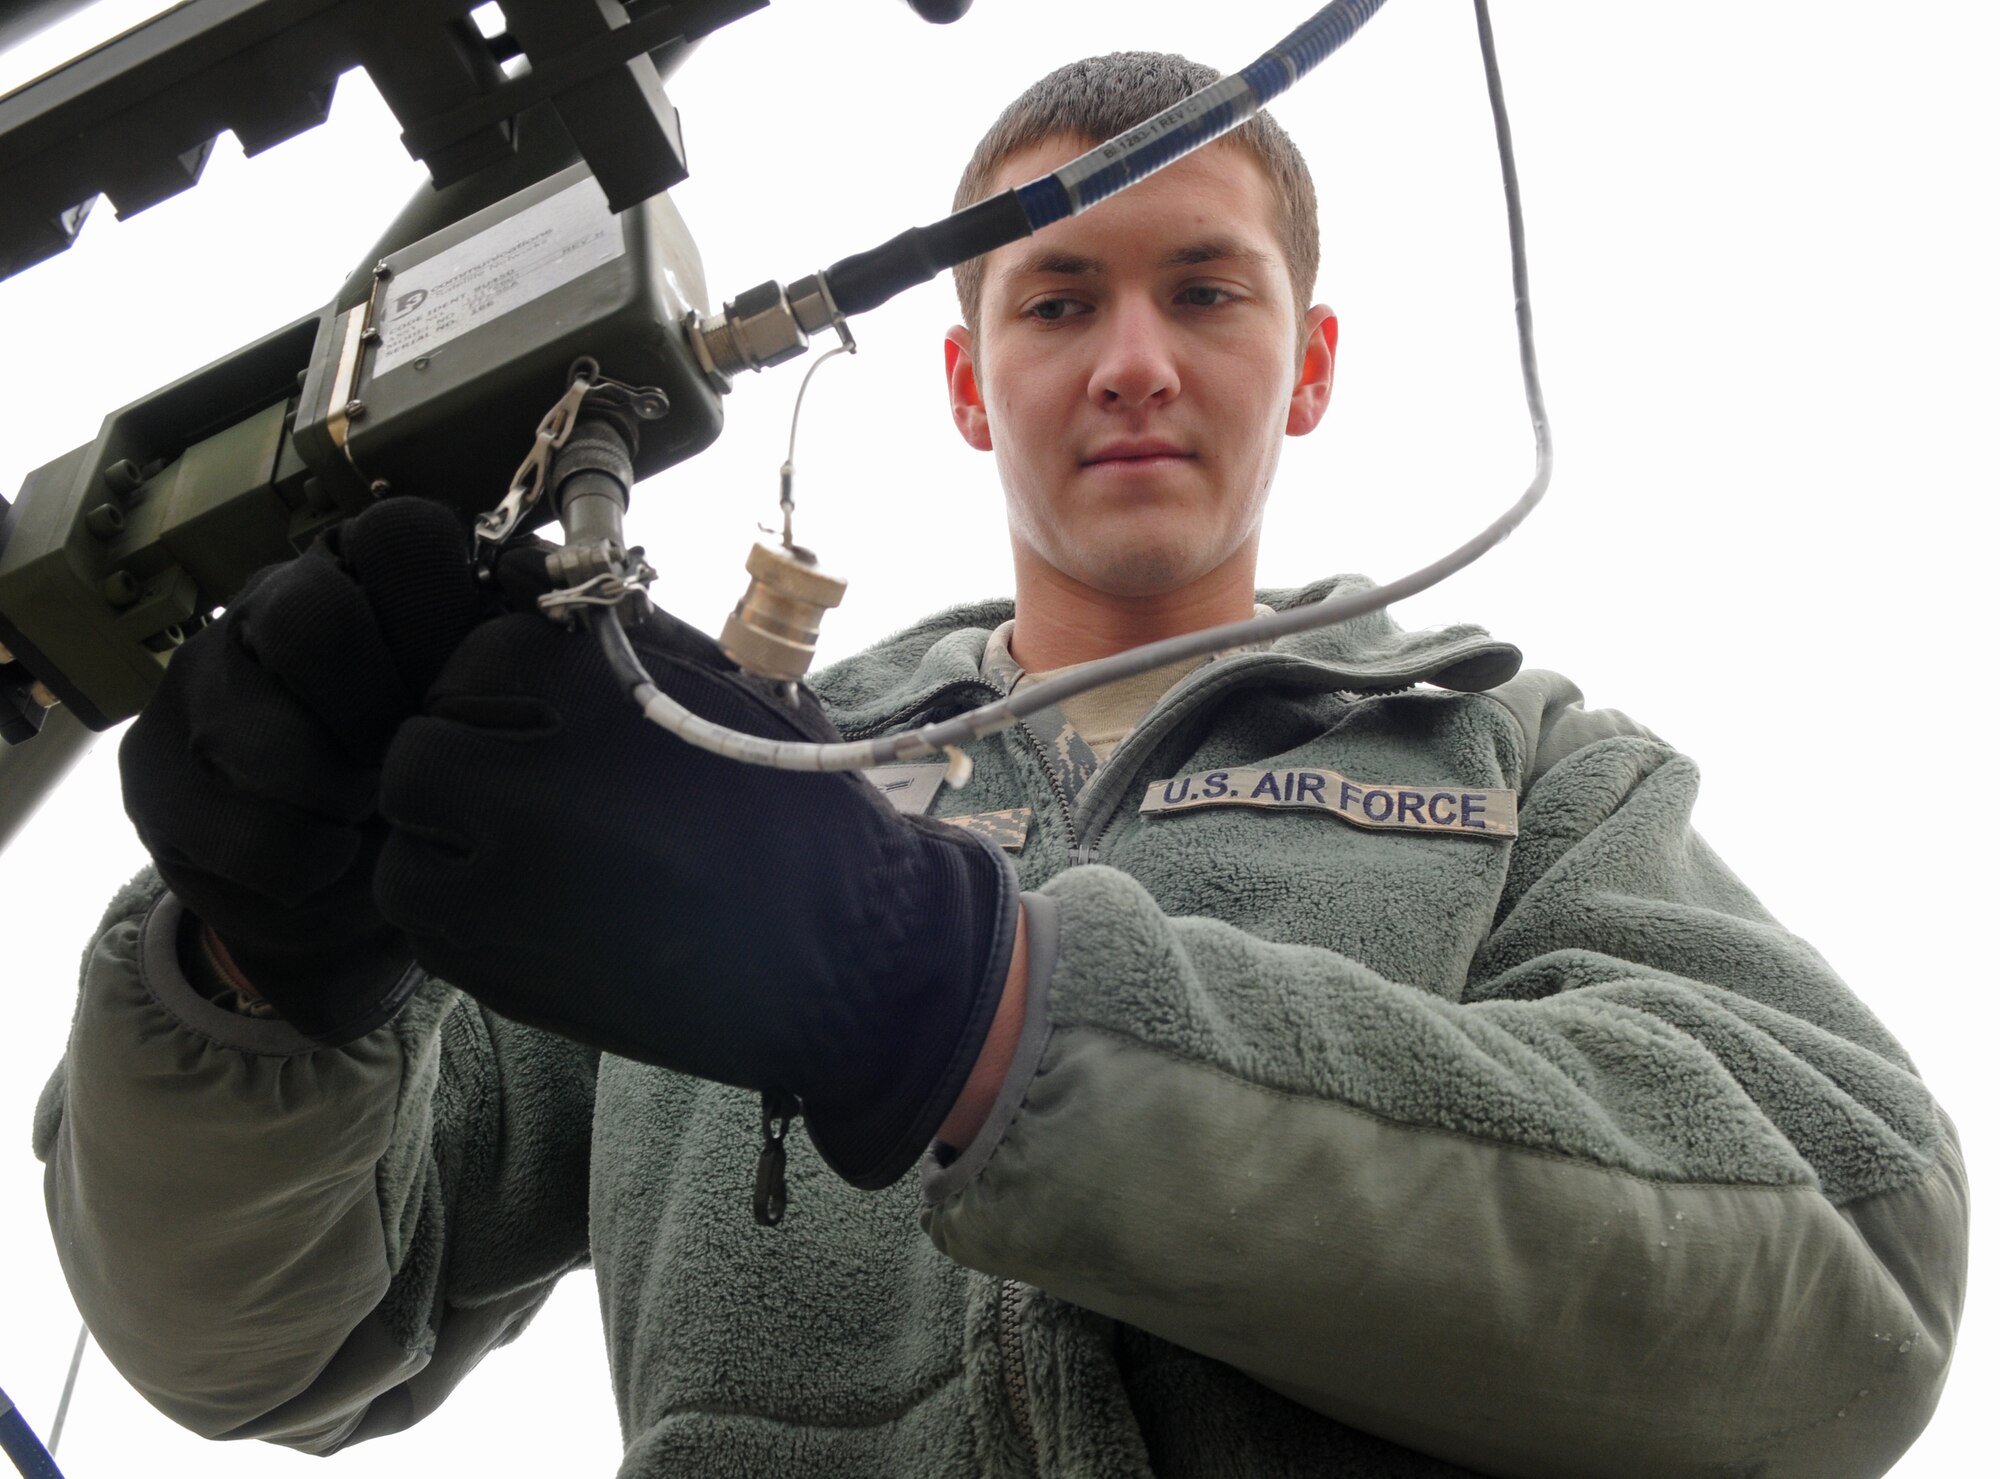 SPANGDAHLEM AIR BASE, Germany – Airman 1st Class Tanner Menzel, 606th Air Control Squadron radio frequency transmissions technician, conducts a preventive maintenance inspection on a satellite communications antenna that provides connectivity to geographically-separated areas Nov. 23. Radio frequency transmissions technicians operate and maintain several satellite terminals and provide connectivity for external forwarding to higher headquarters. (U.S. Air Force photo/Airman 1st Class Matthew B. Fredericks)